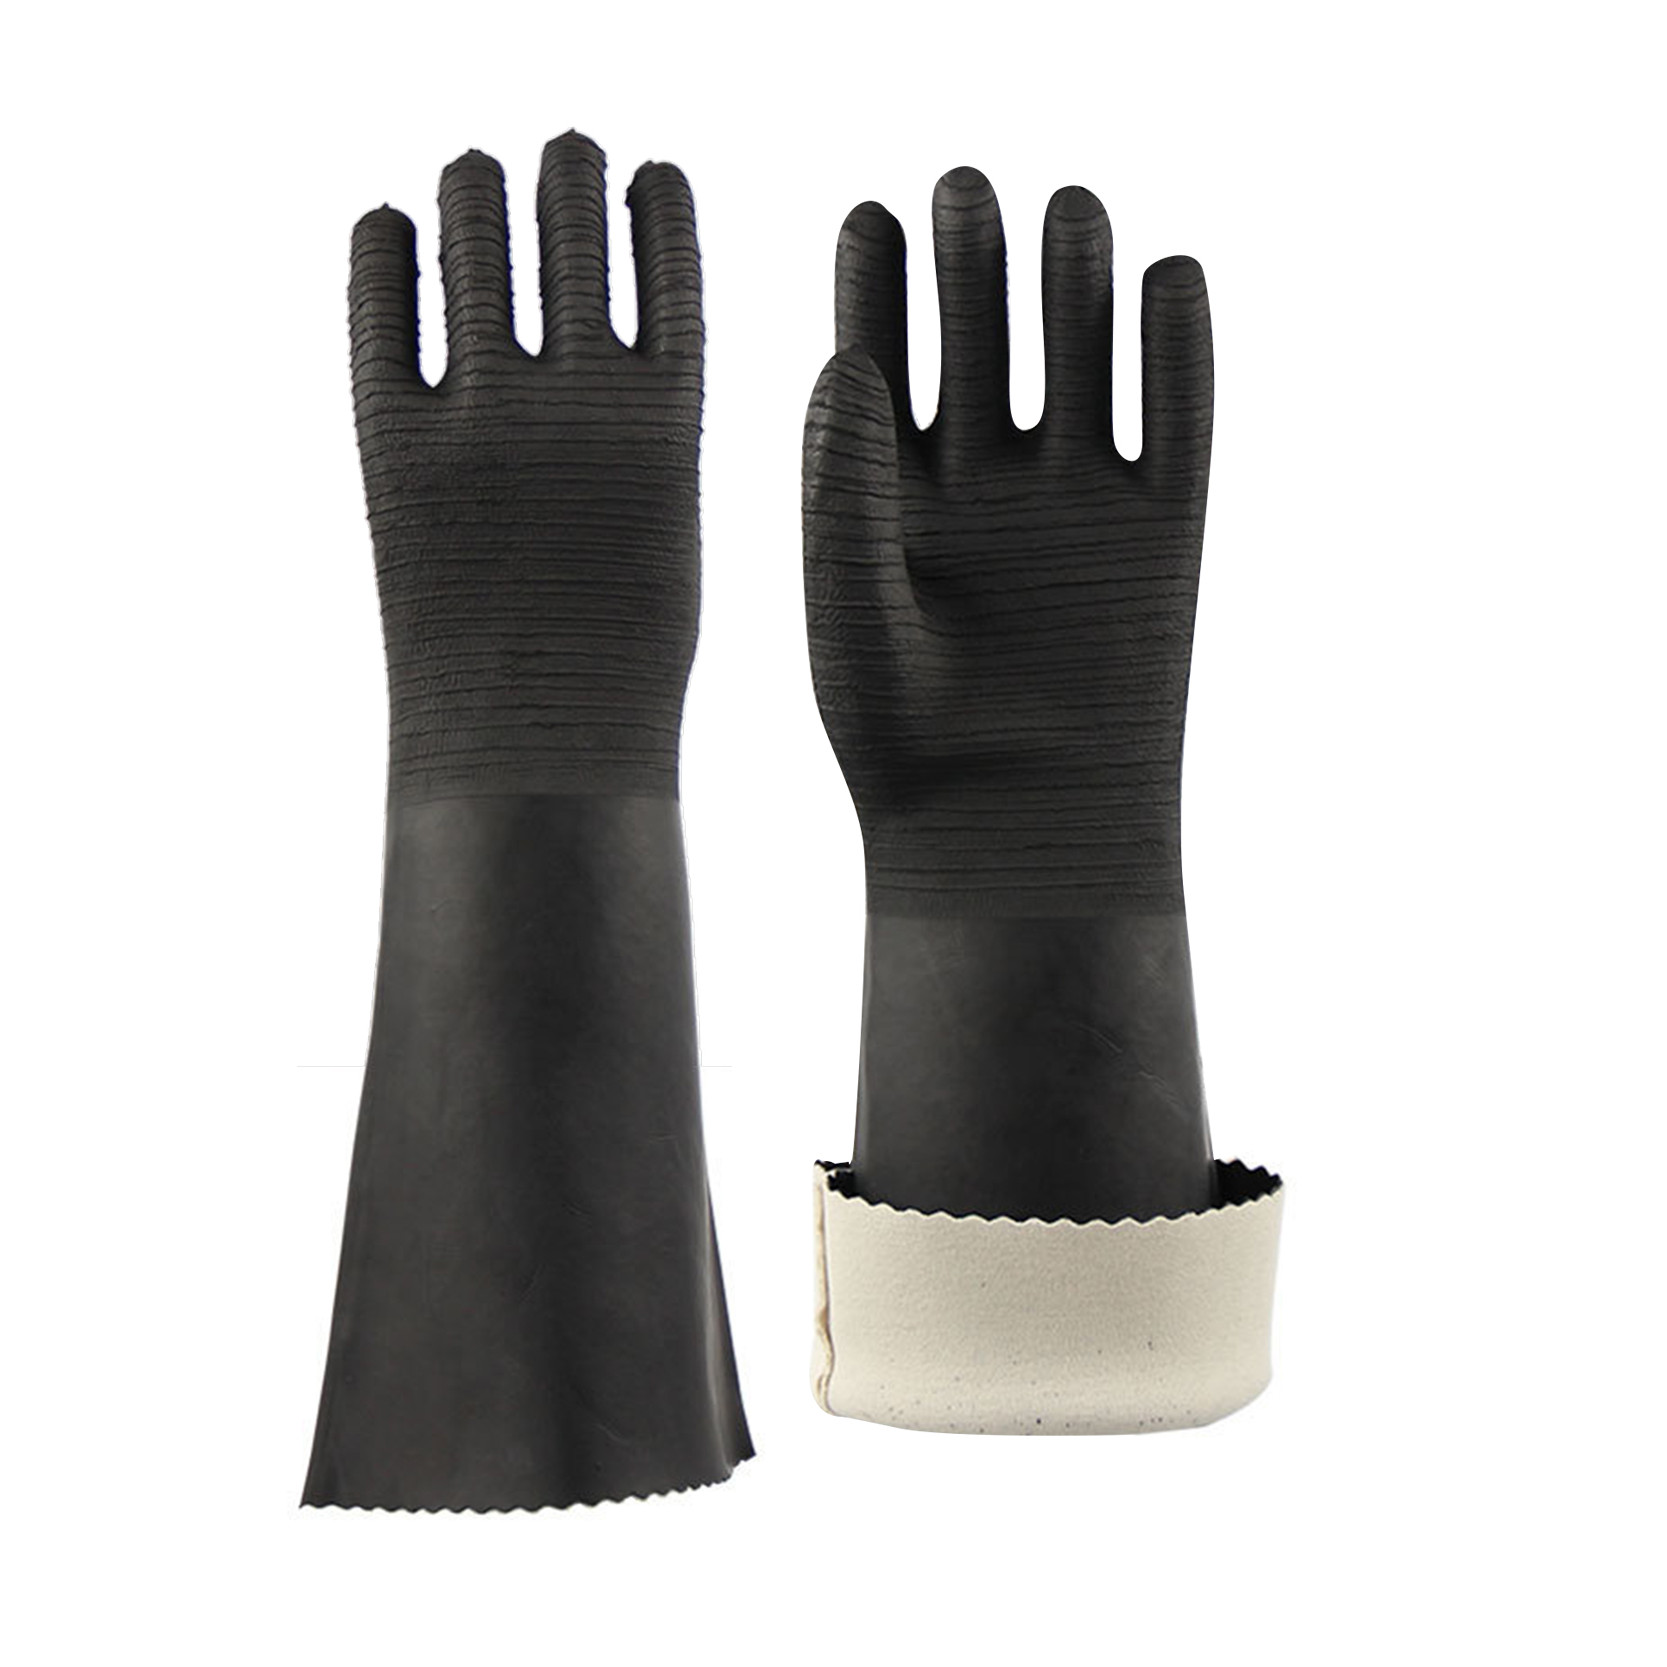 Chemical Resistant Gloves, Waterproof Reusable Purgatio Protective Safety Opus Gloves